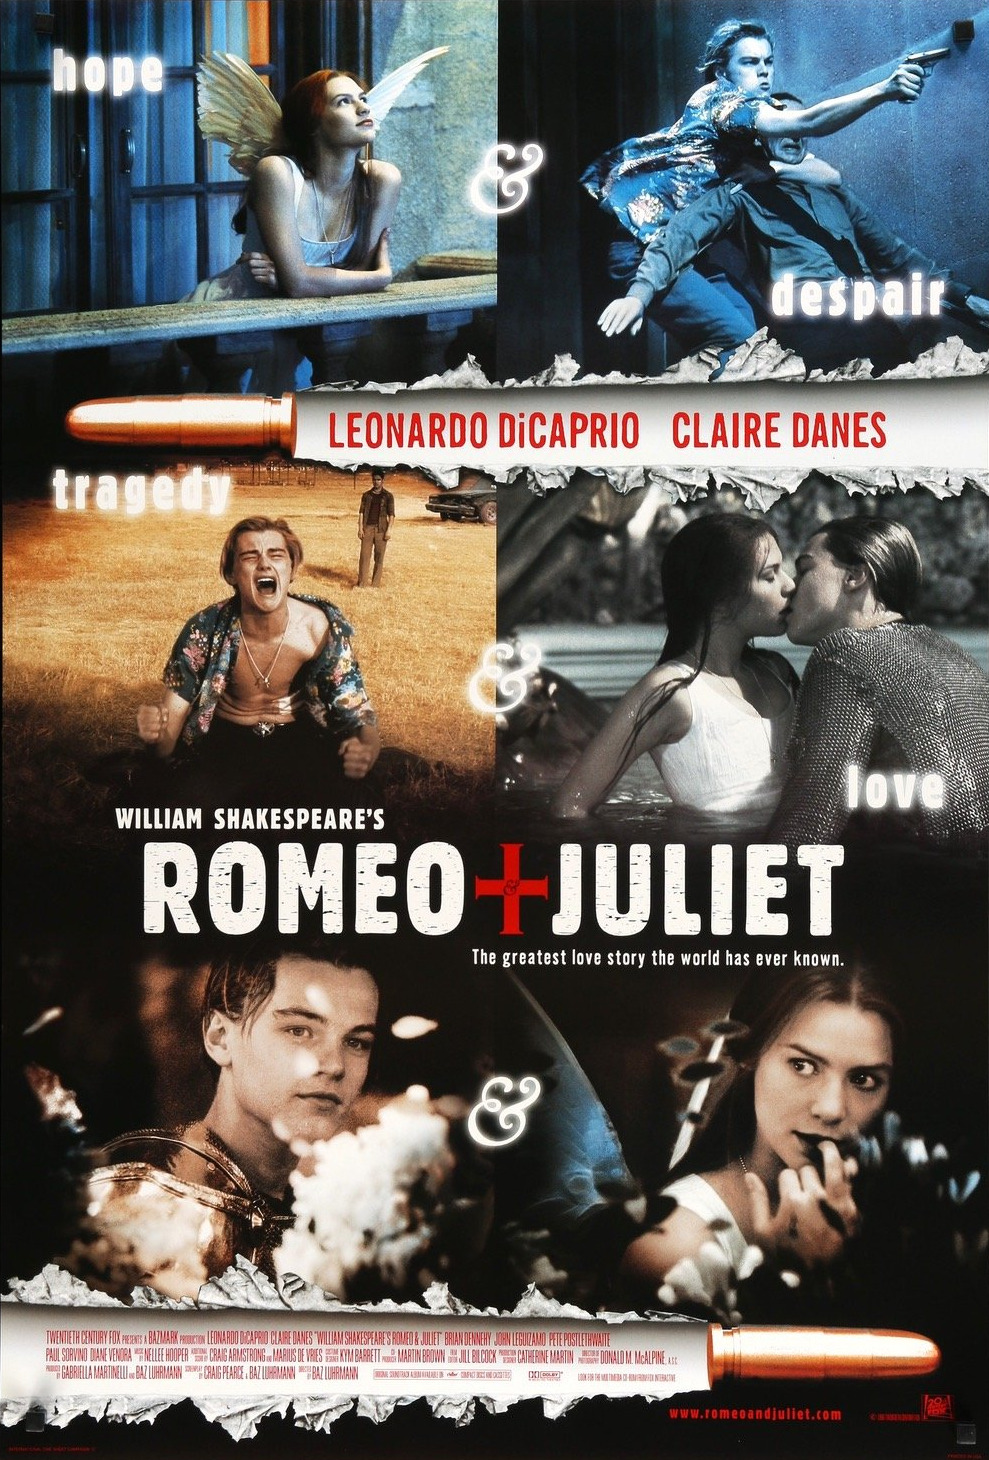 Extra Large Movie Poster Image for William Shakespeare's Romeo & Juliet (#2 of 2)